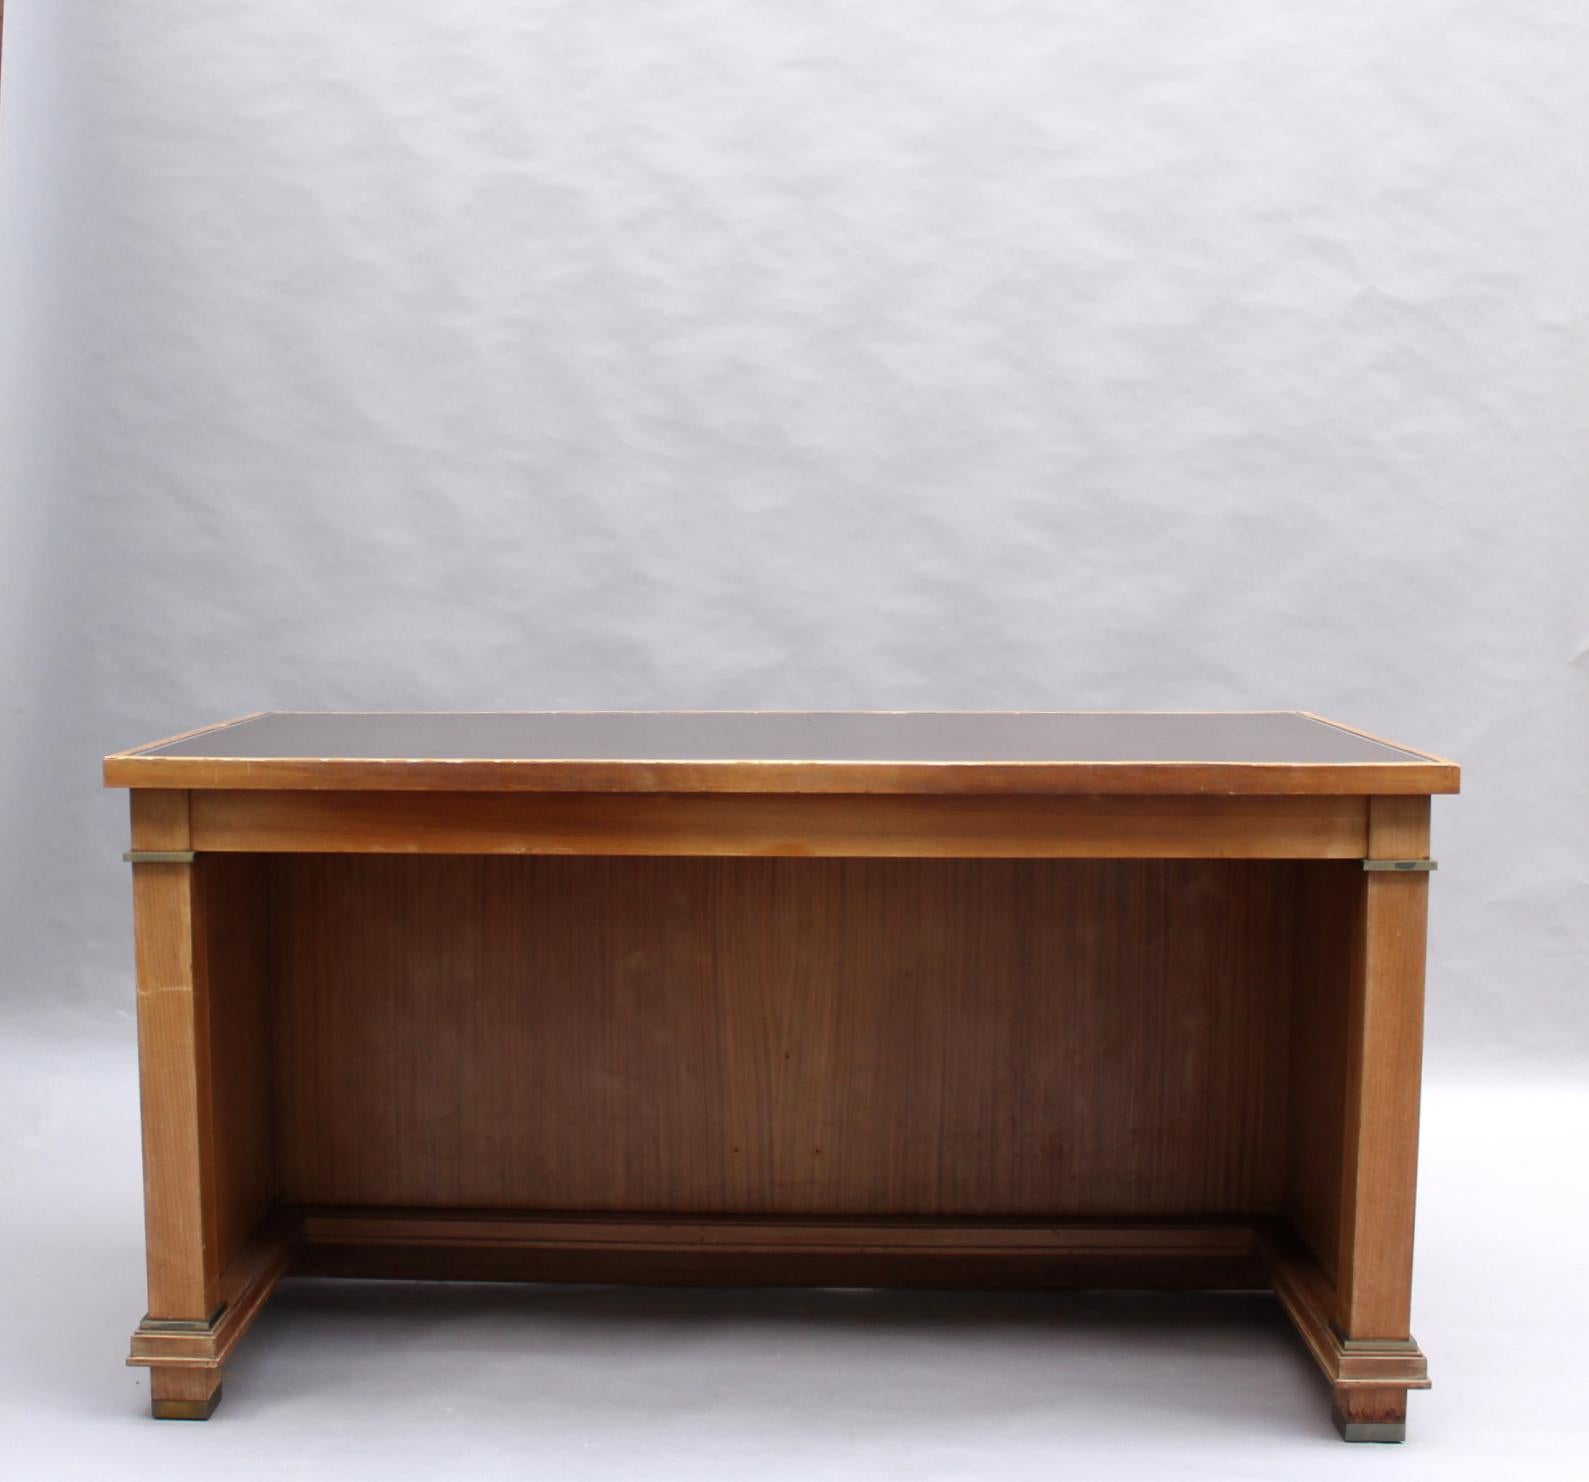 Jacques Adnet: A fine French mid-century mahogany desk with a leather top and bronze details.
Provenance: Palais des Consuls of Rouen, France.
2 desks available as well as two curved desks from the same provenance (ref. # LU784816309161).